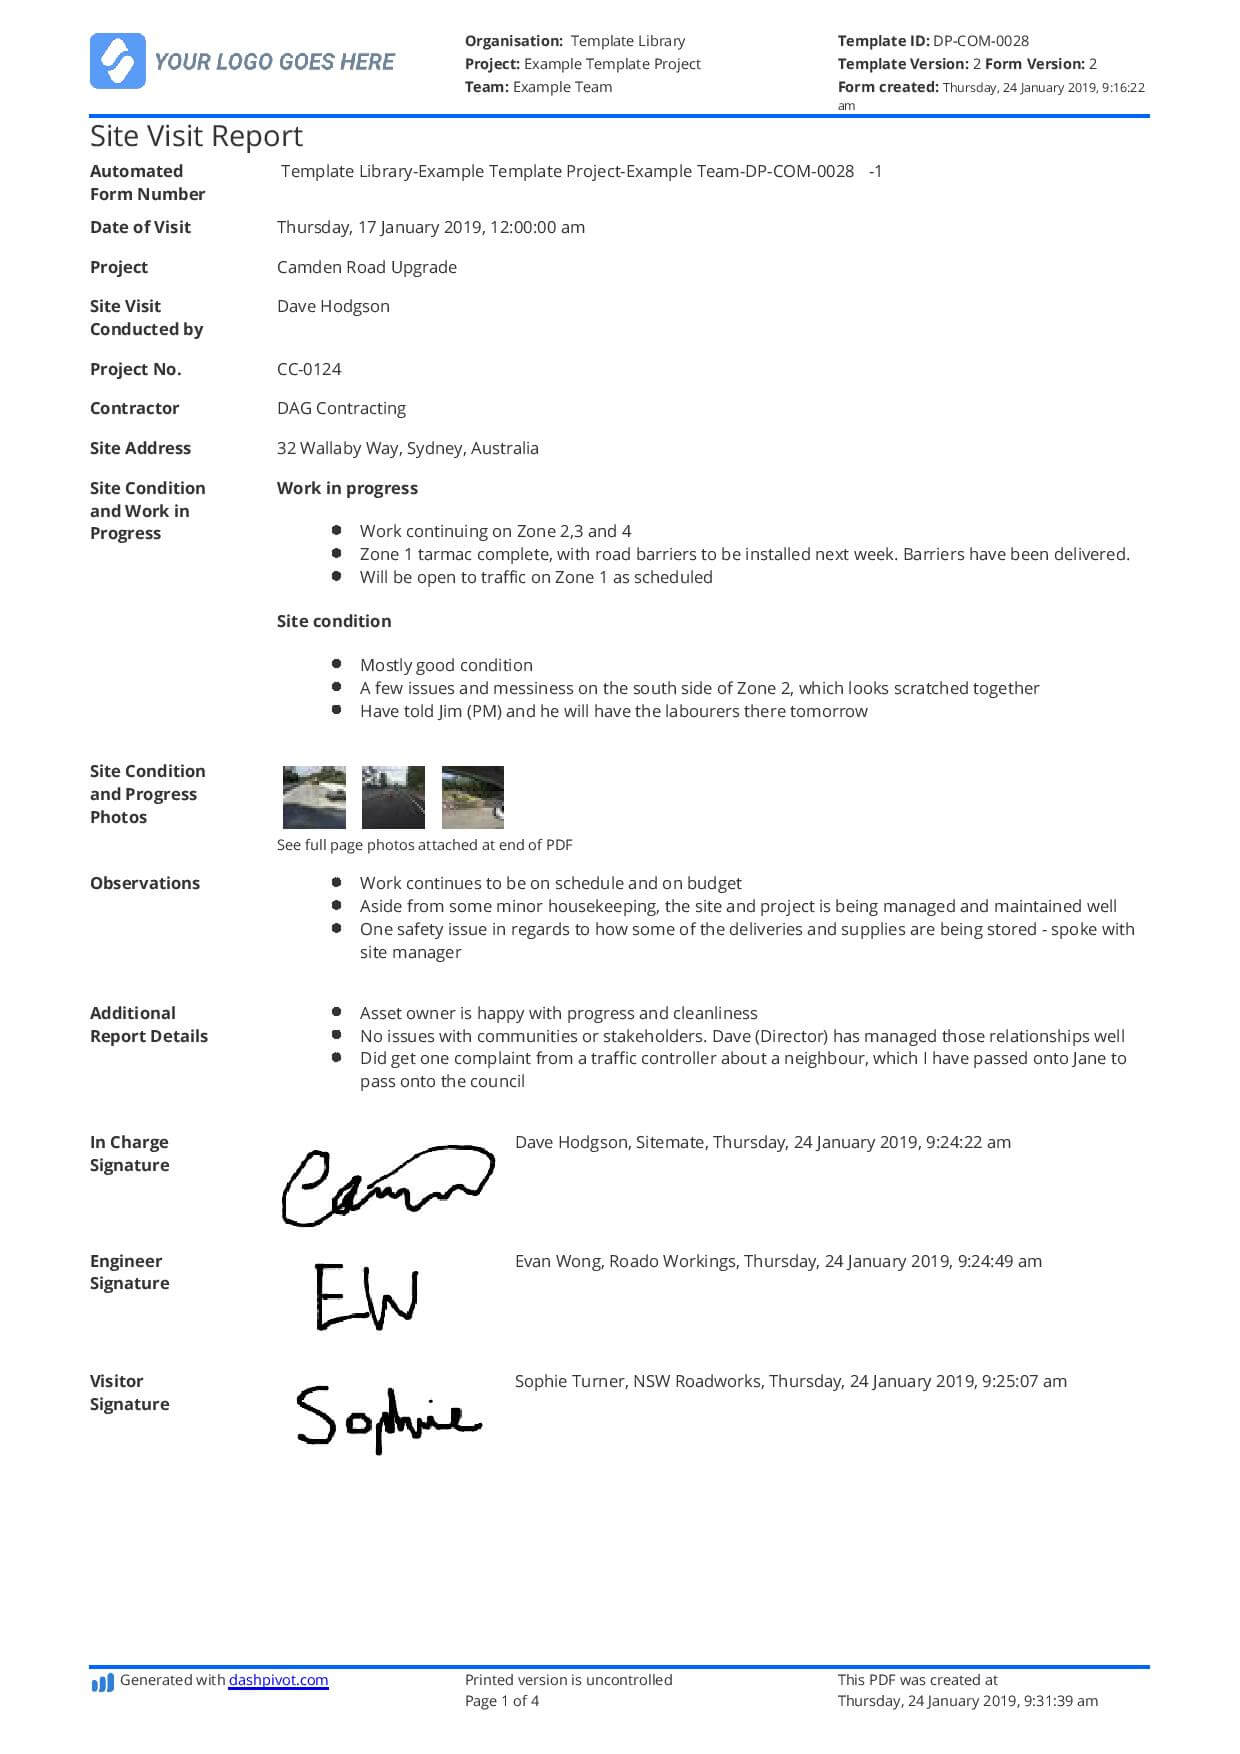 Construction Site Visit Report Template And Sample [Free To Use] Intended For Site Visit Report Template